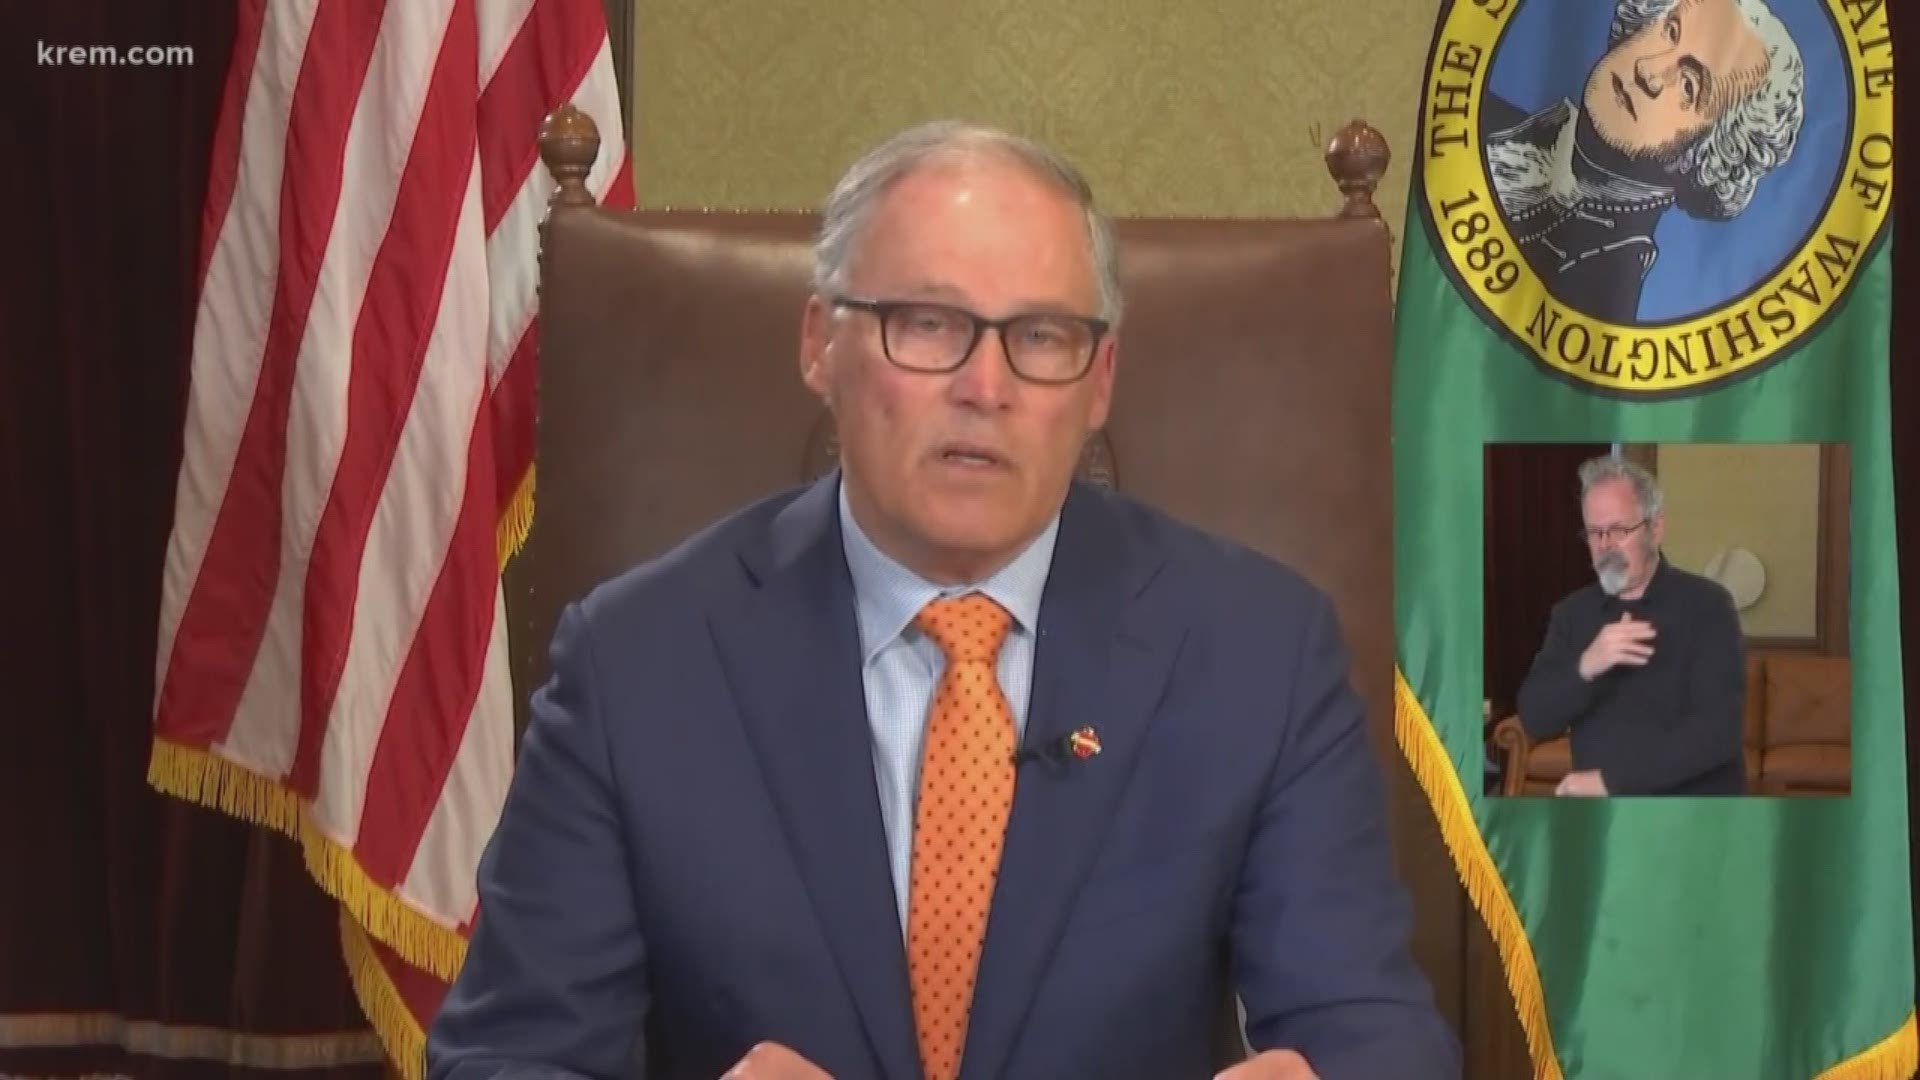 Washington Governor Jay Inslee spoke to the public Tuesday about what needs to happen to reopen Washington amid the coronavirus pandemic.